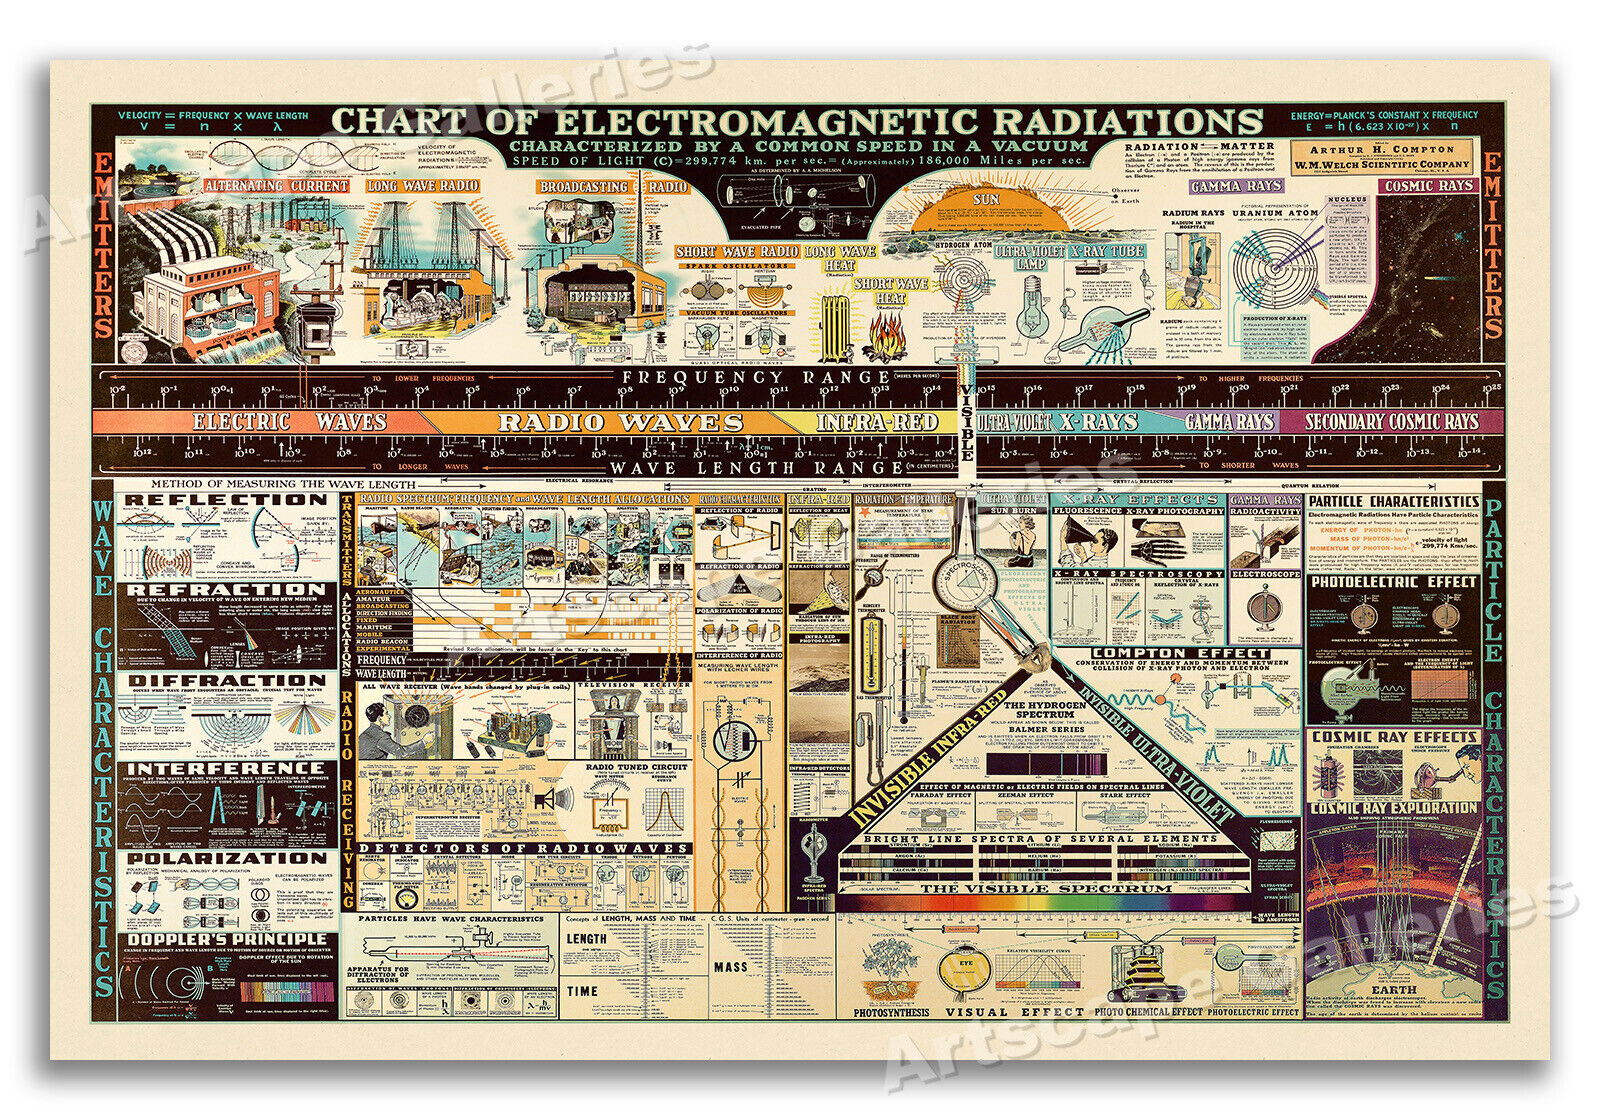 Chart of Electromagnetic Radiations 1940s Vintage Science Poster - 20x30